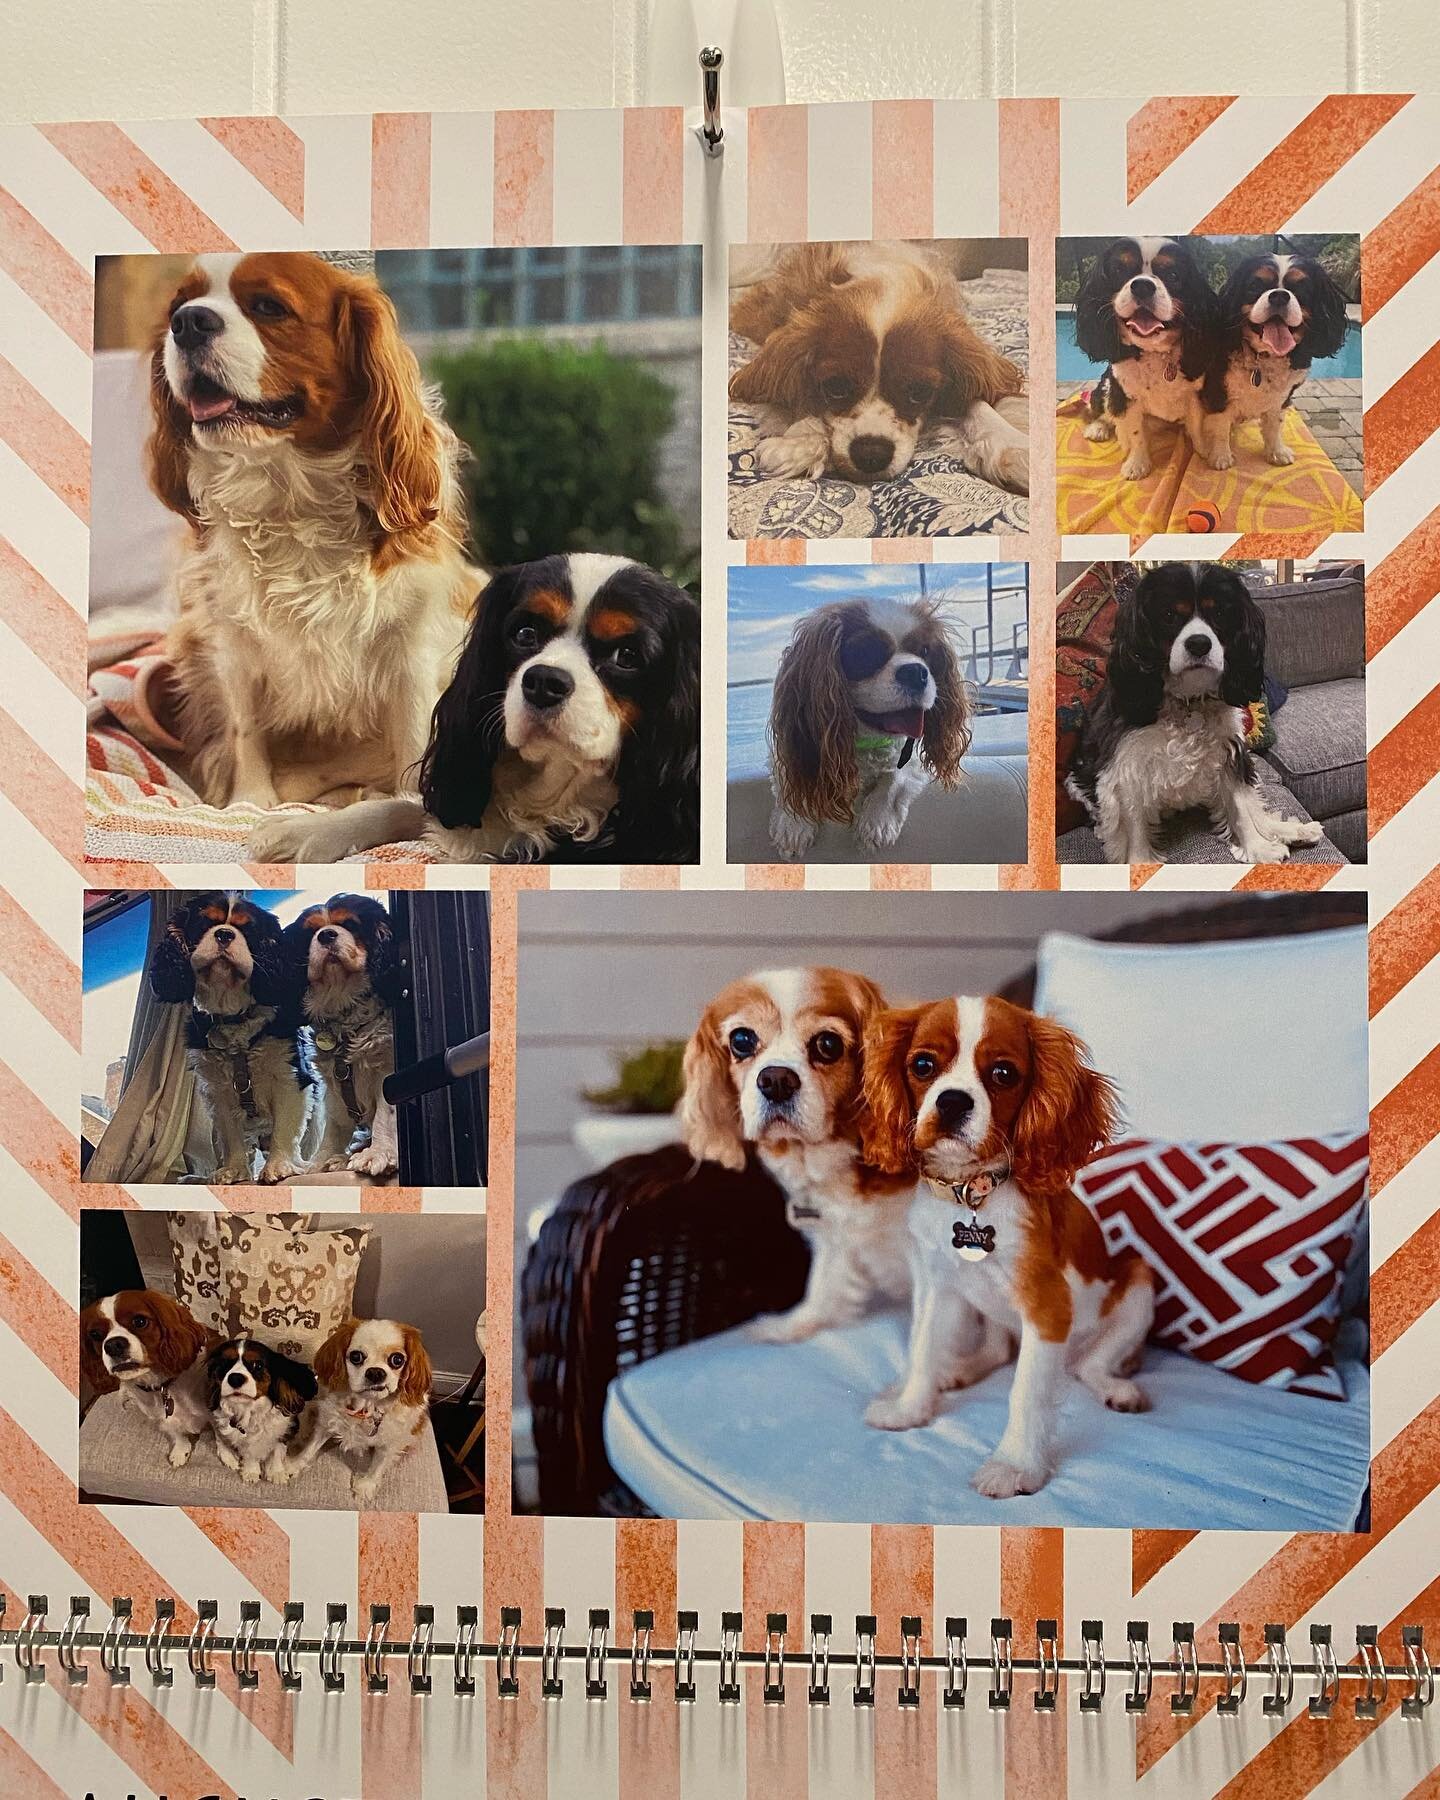 Hello August!!! Happy birthday to all our pawsome pals! We hope everyone is doing well! 🥳🐾🐶🎉🎈 #nashvillecavaliers #happybirthday